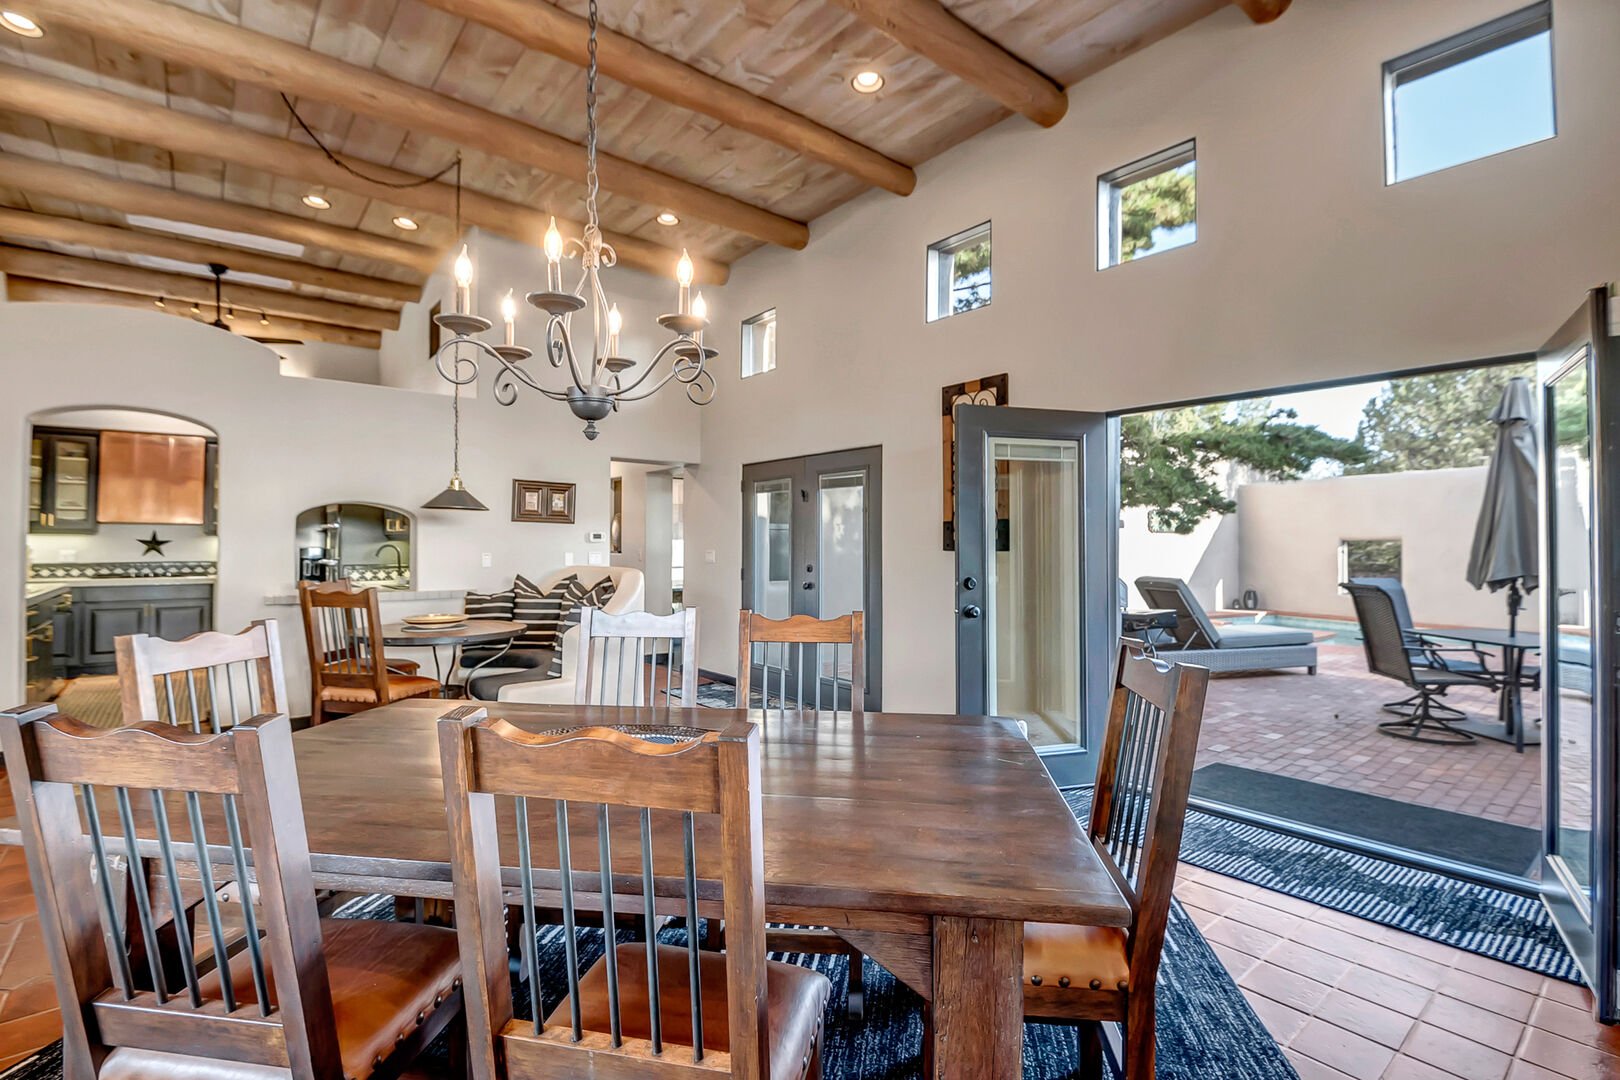 Dining Space Opens Up to Patio Area